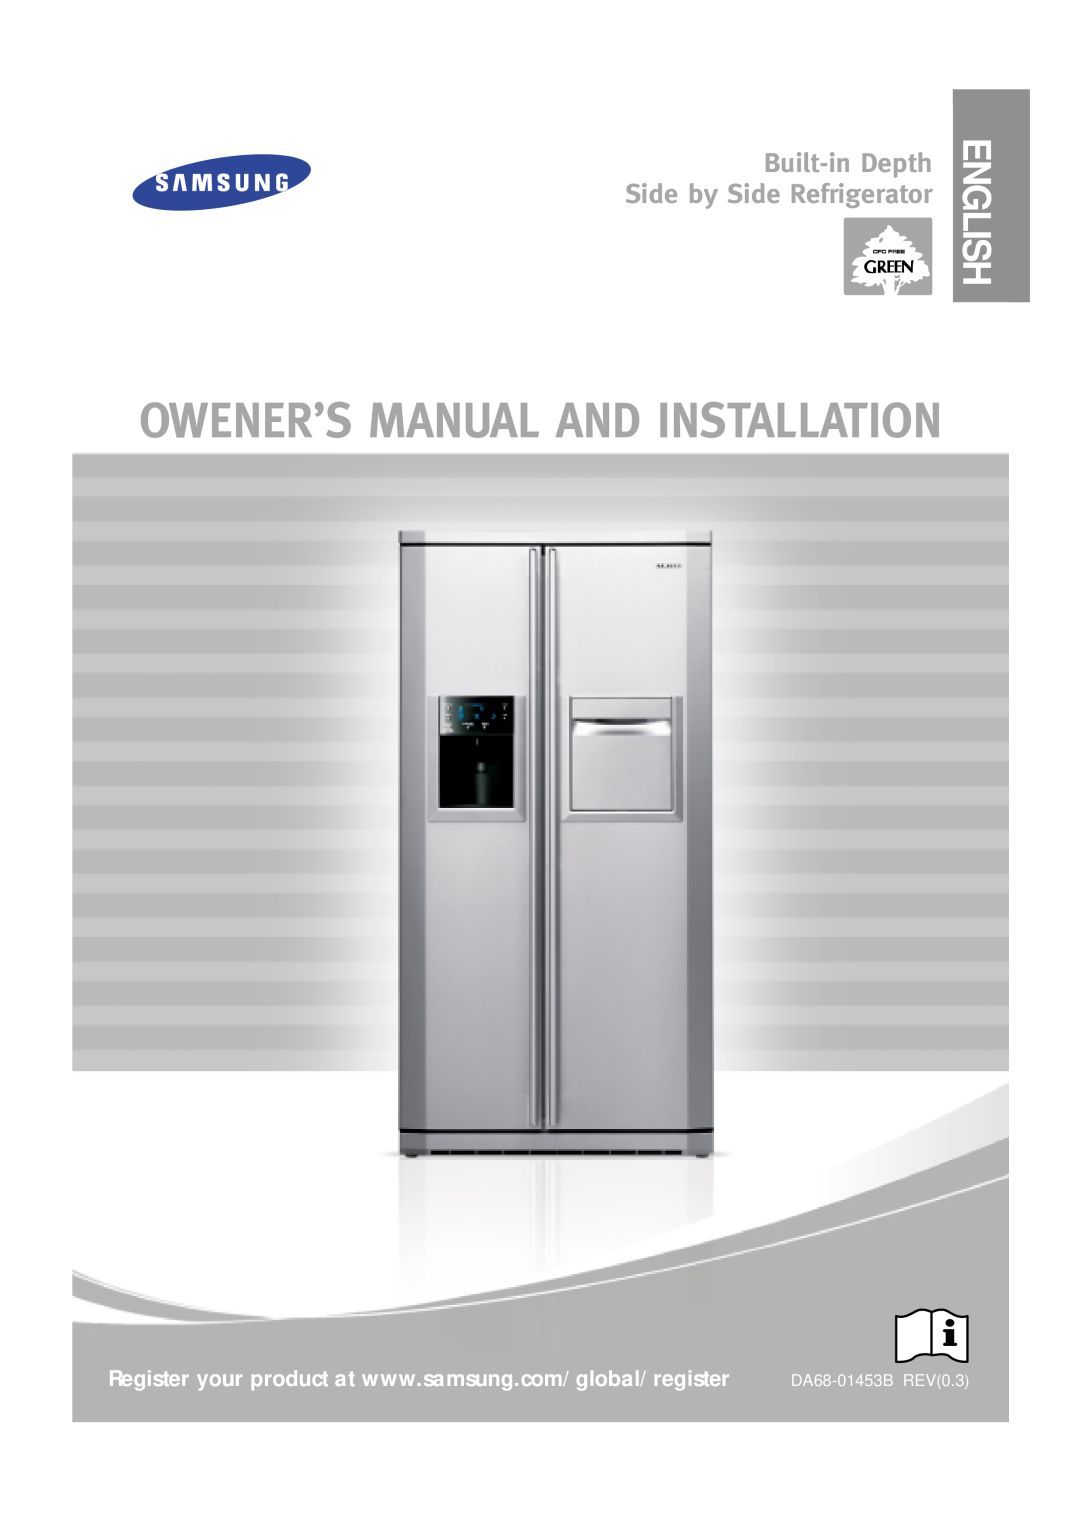 Samsung RSE8F, RSE8N, RSE8B manual English, Owener’S Manual And Installation, Built-inDepth Side by Side Refrigerator 